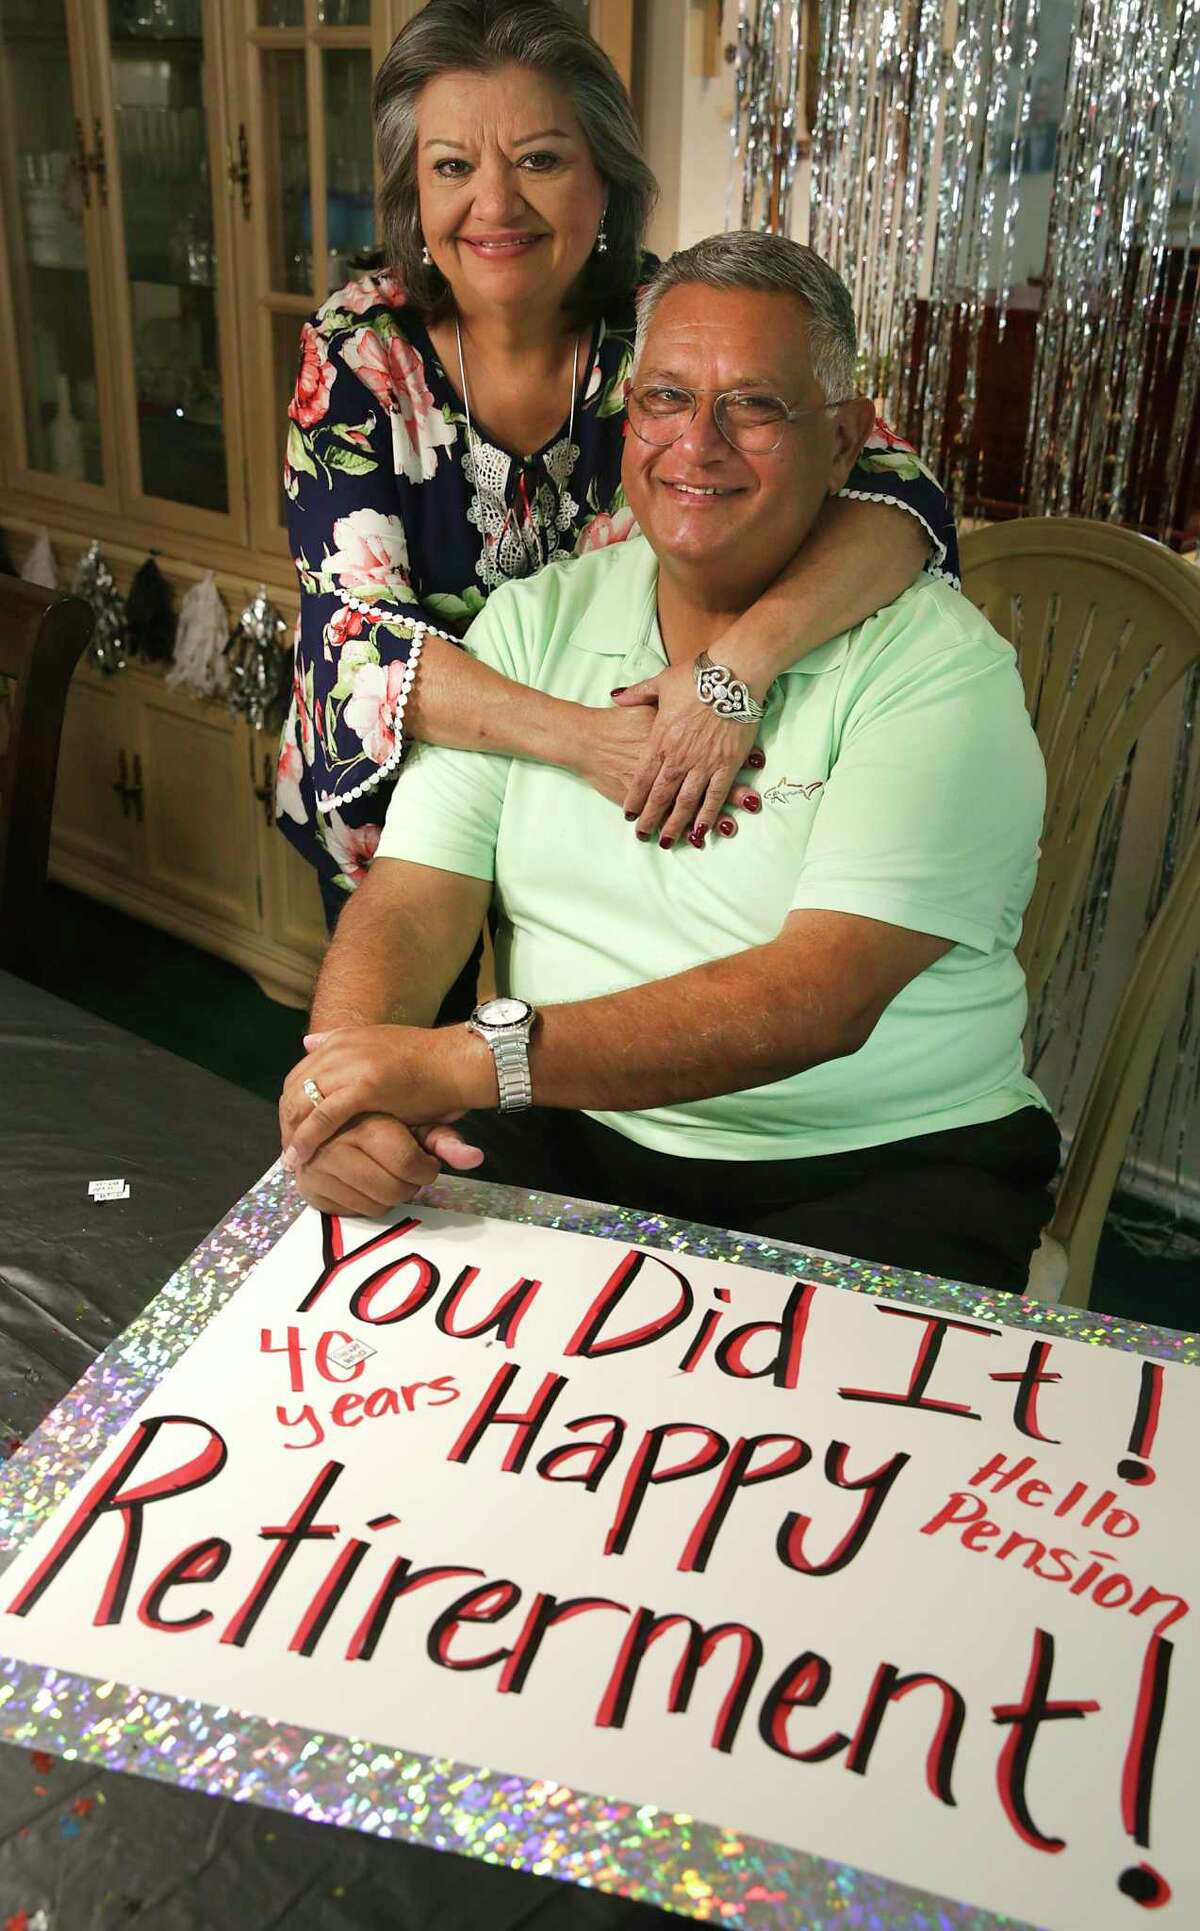 Roy Chapa, a VIA bus operator, etired after 41 years of driving the streets of San Antonio accumulating a whopping 3 million miles. He and his wife Elia are shown at home Wednesday. He was greeted at his last bus stop pick up with this sign made by his daughter.